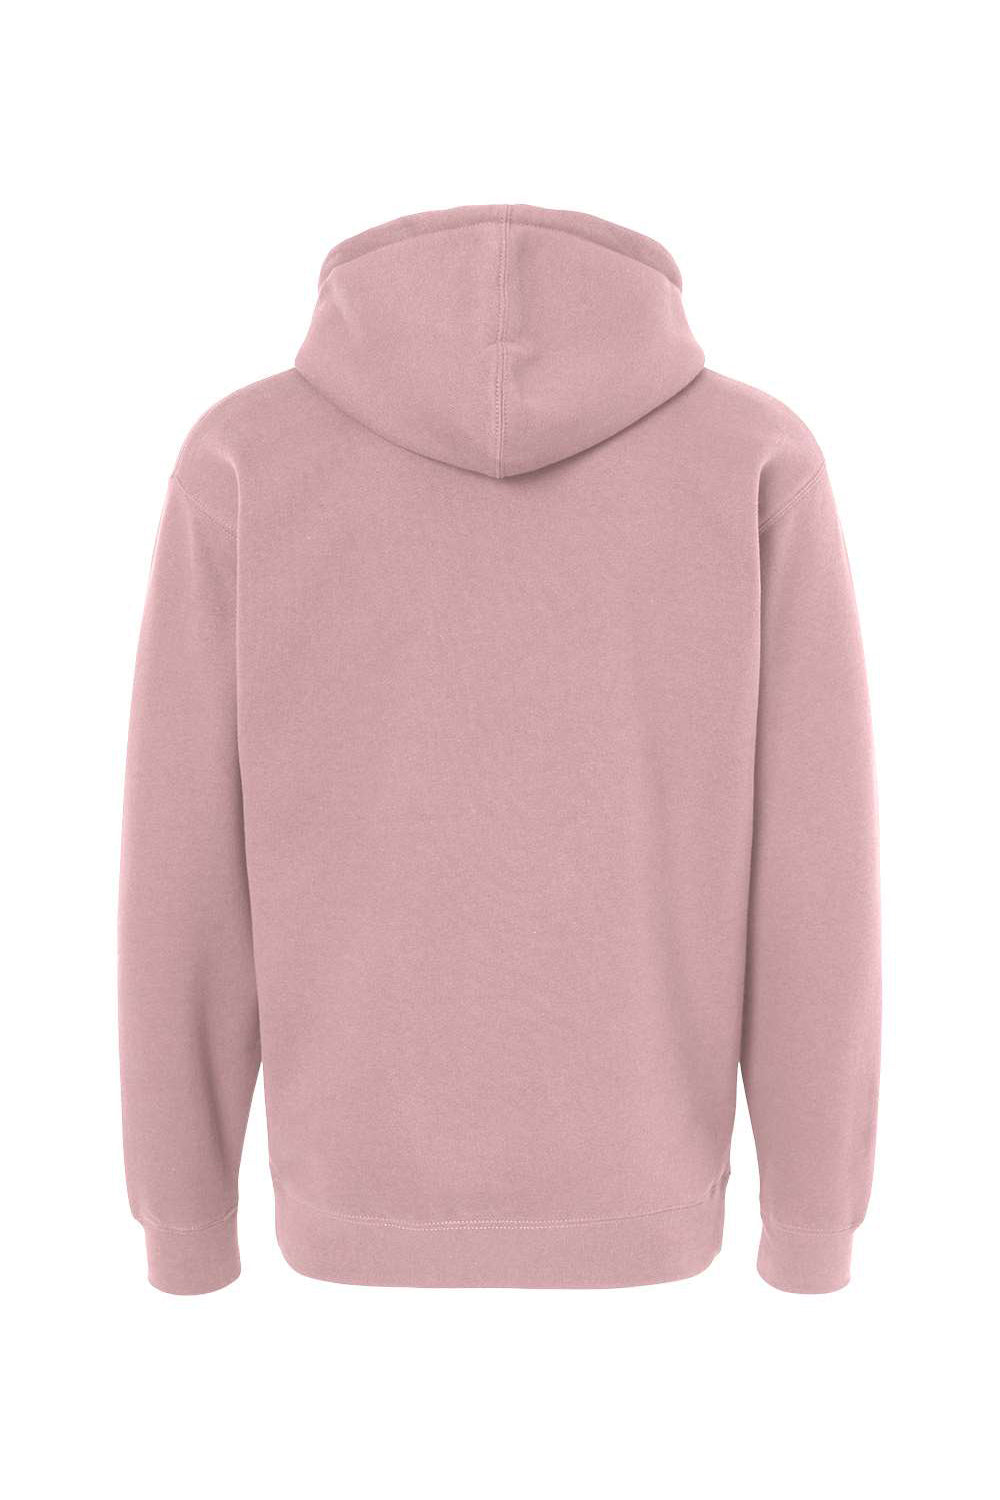 Independent Trading Co. IND4000 Mens Hooded Sweatshirt Hoodie Dusty Pink Flat Back